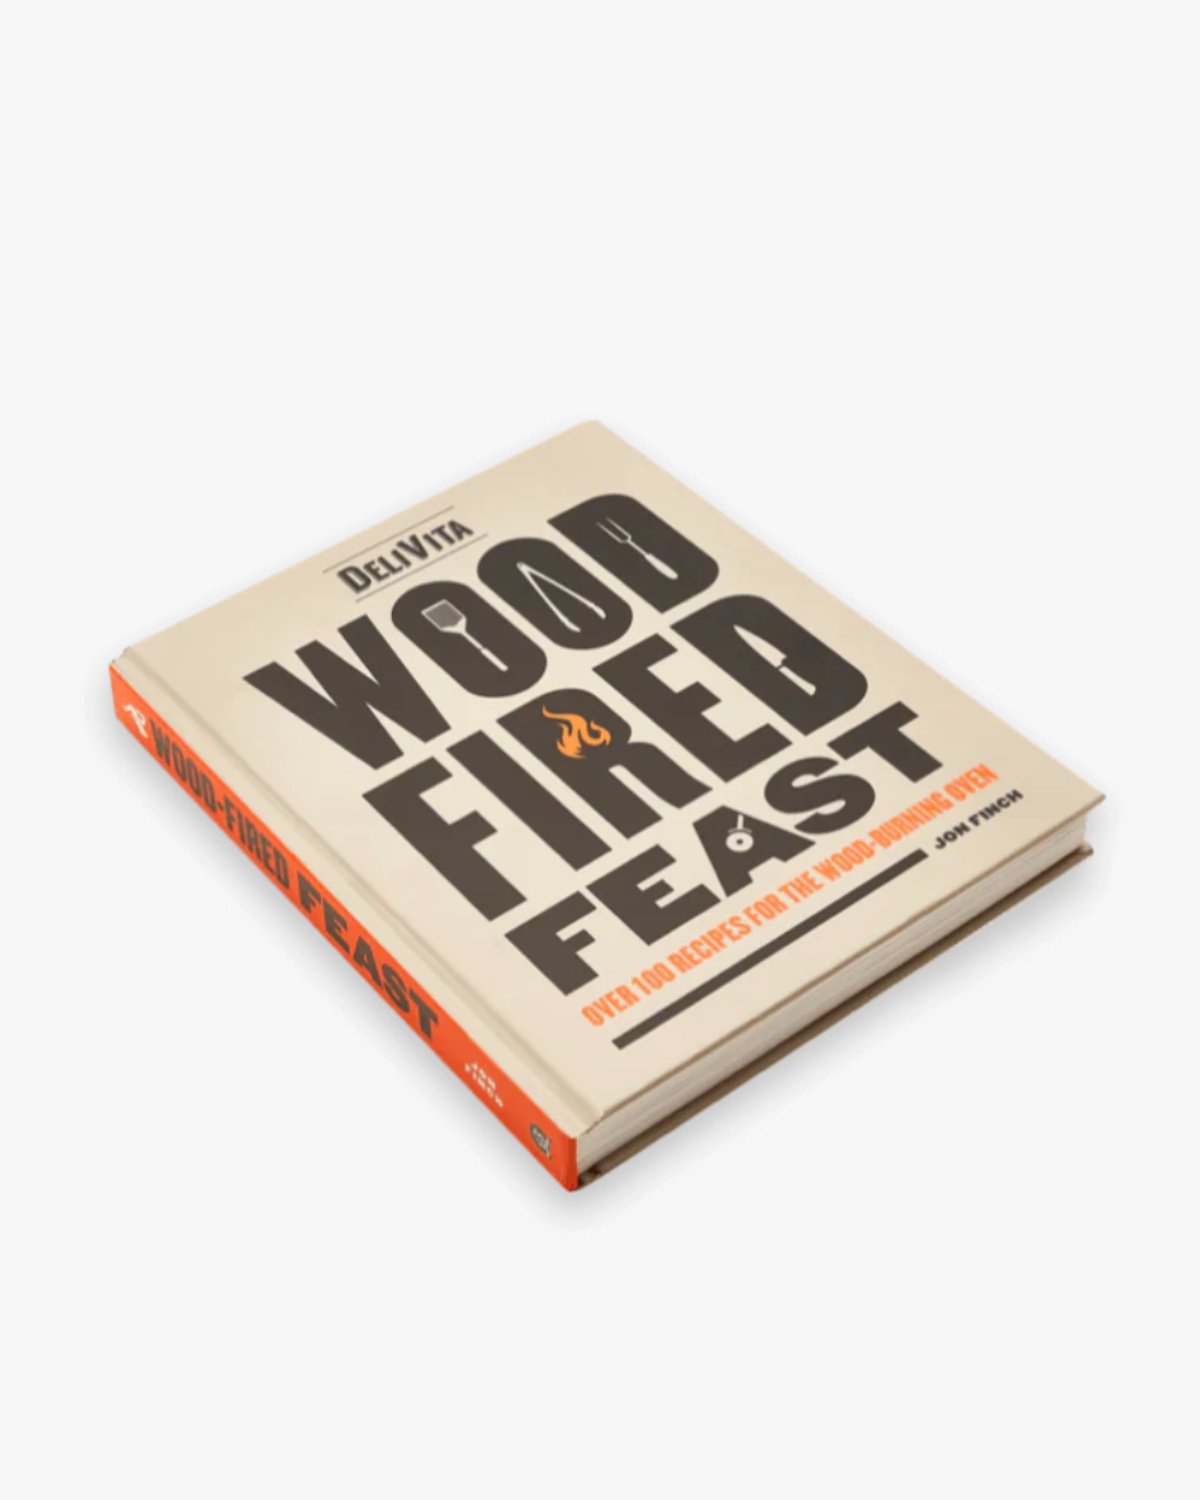 Delivita Wood Fired Feast Book - The Outdoor Kitchen Company Ltd